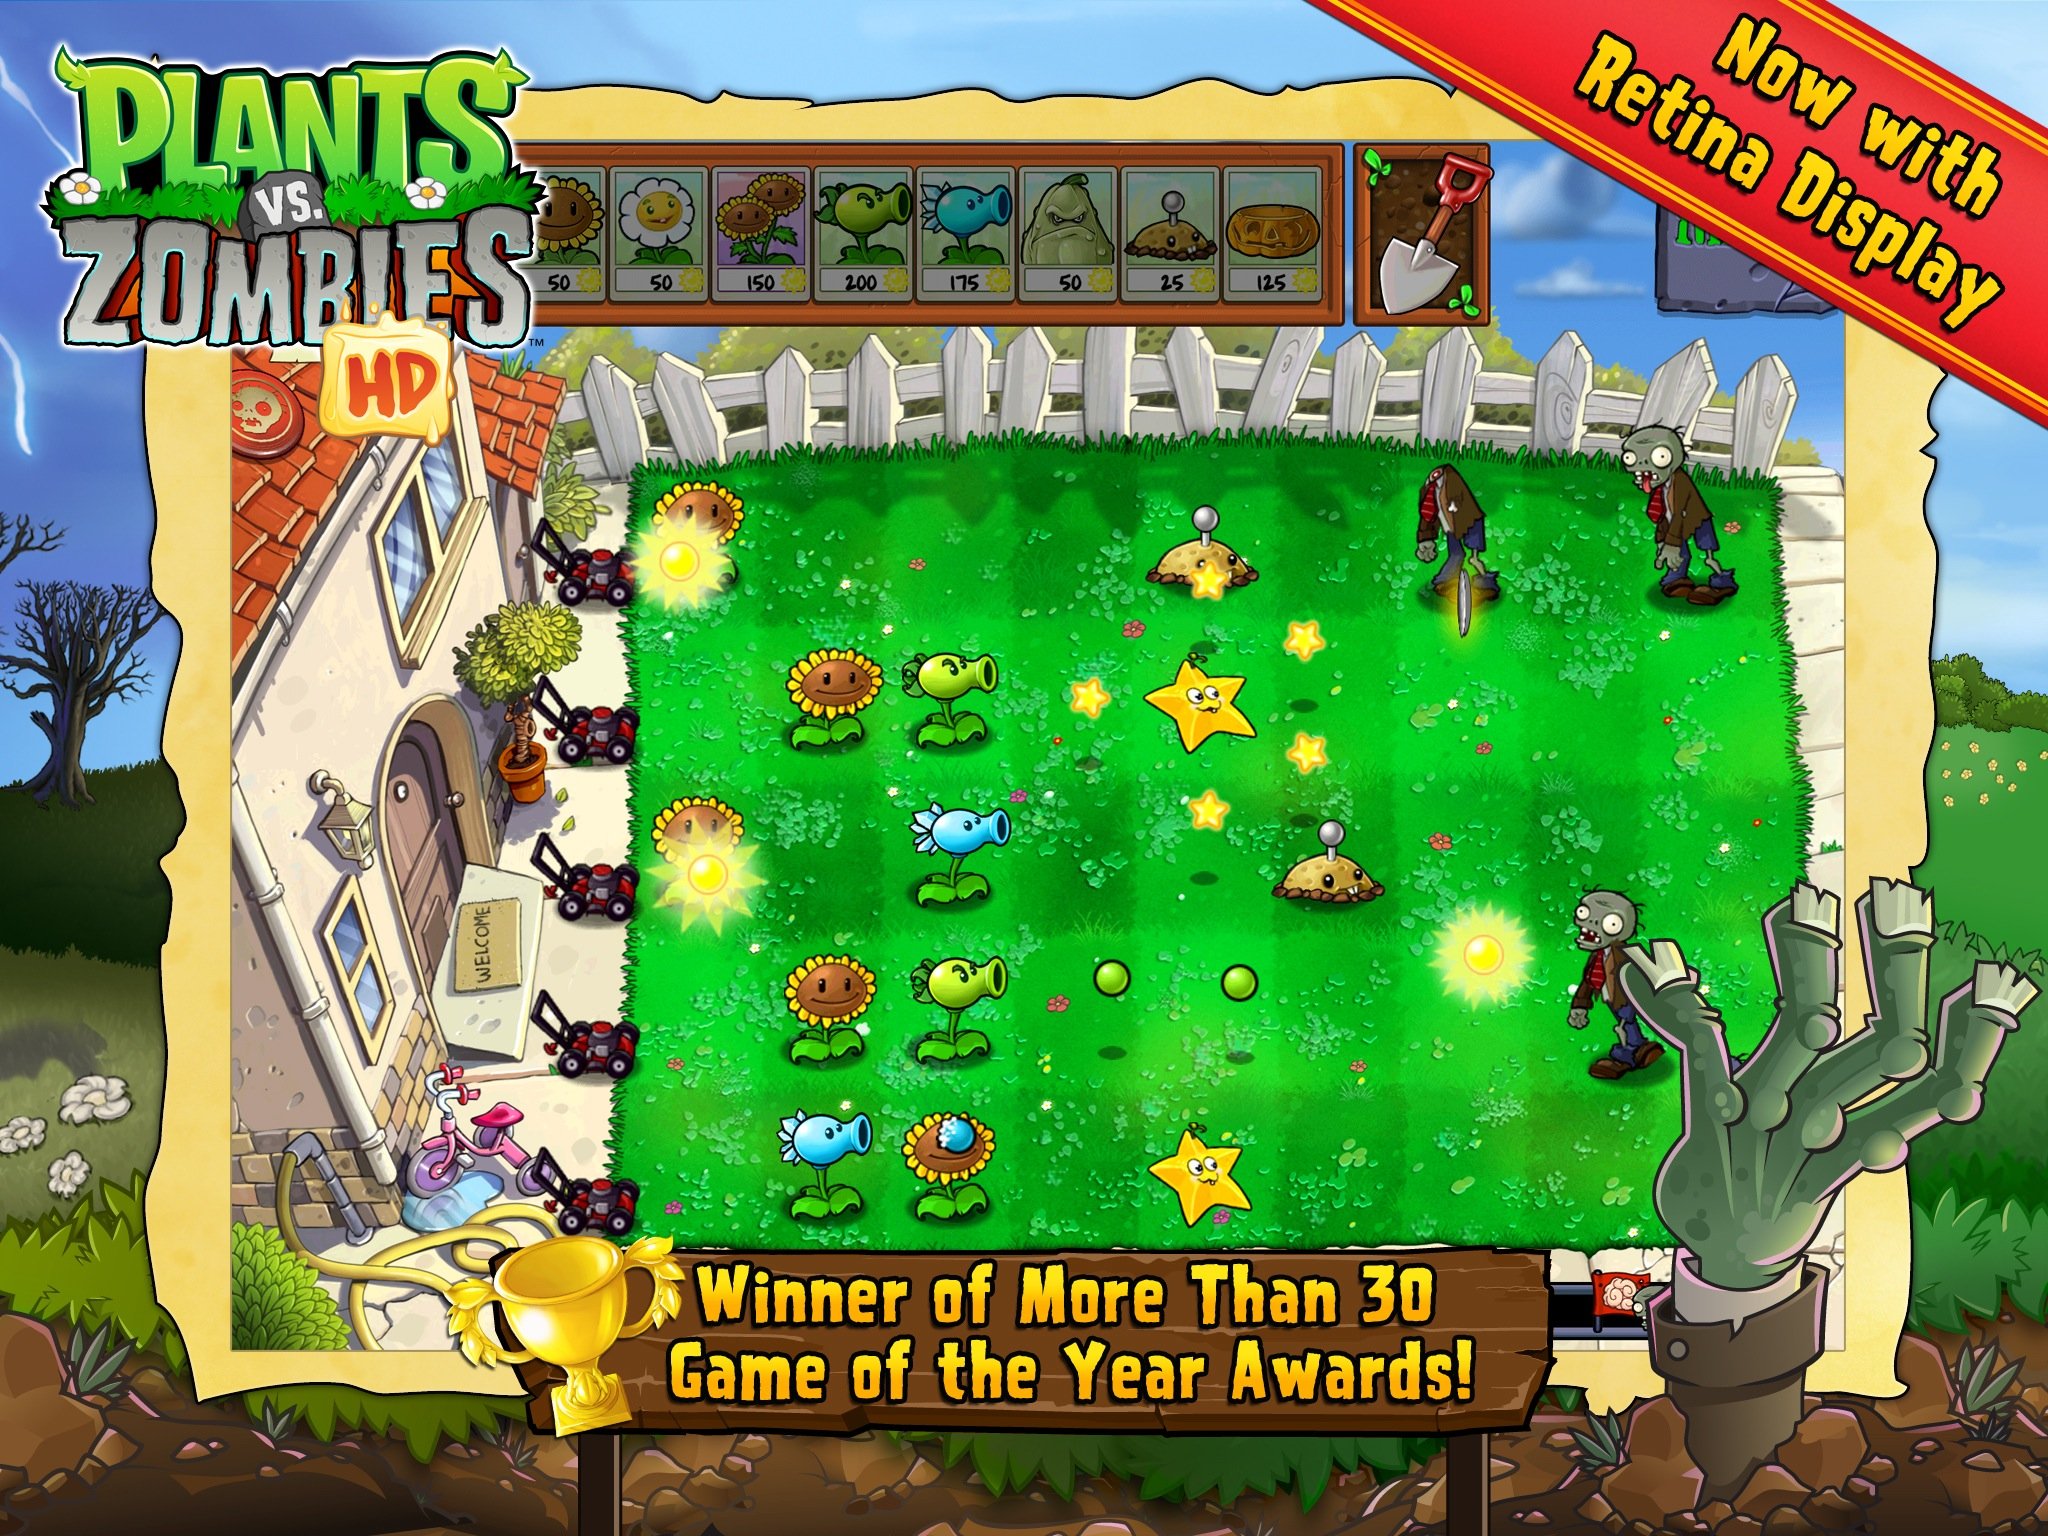 Major New Updates for iOS Versions of Plants vs. Zombies